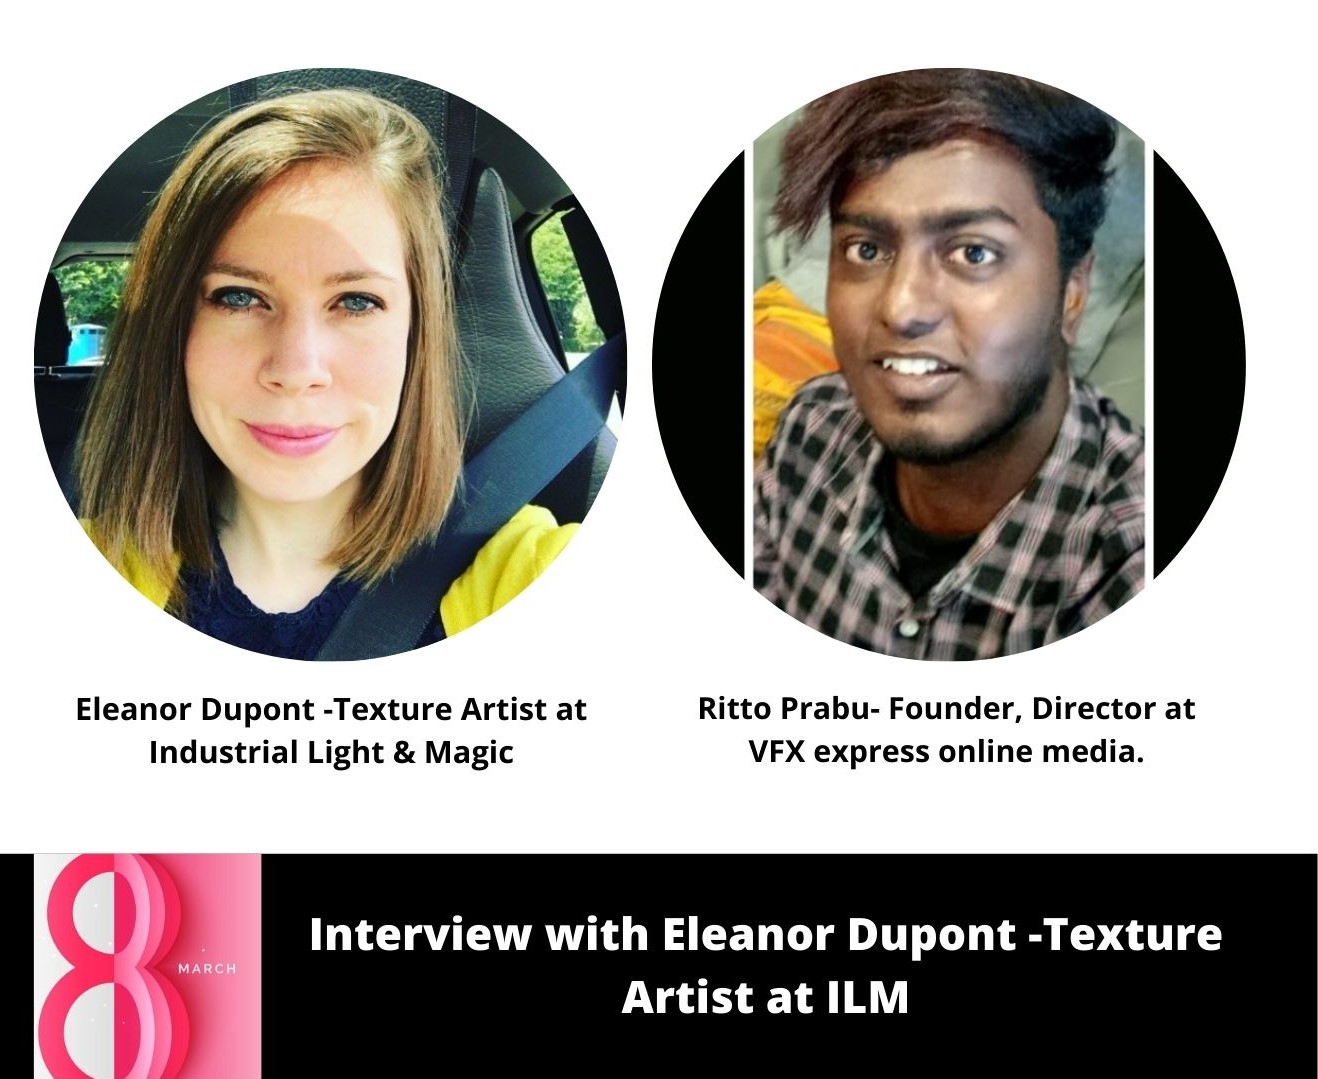 Women’s day Interview with Eleanor Dupont -Texture Artist at ILM